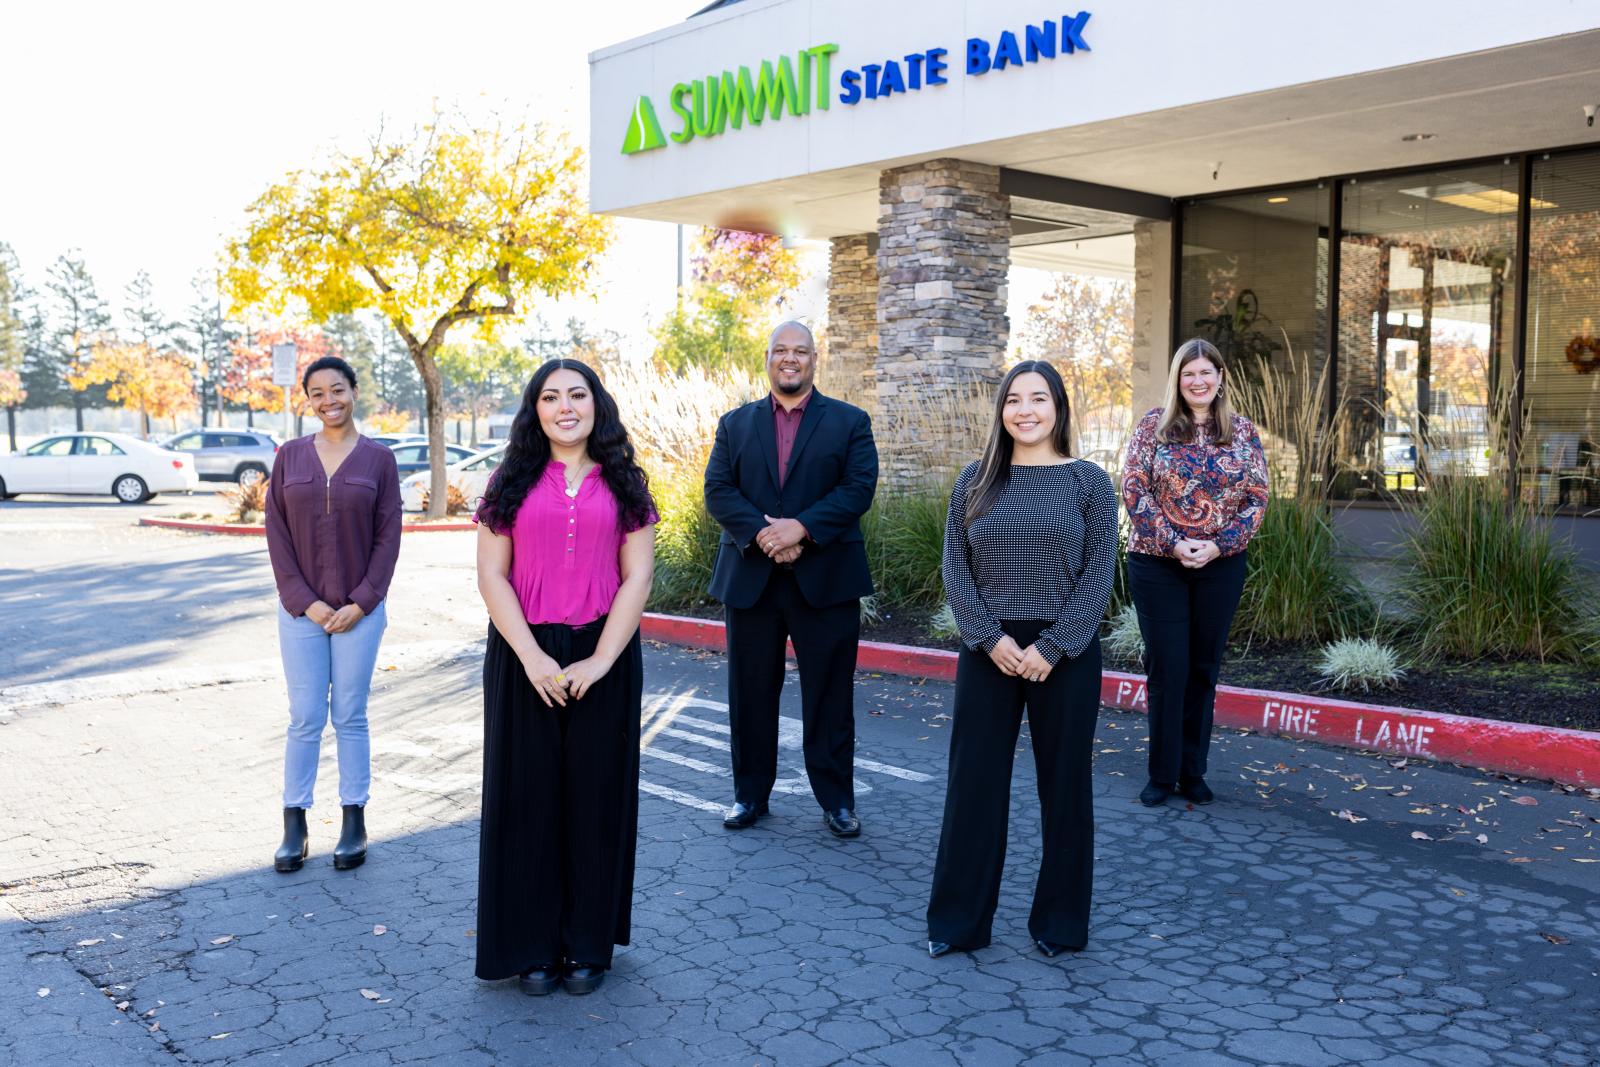 7 of Summit State Bank's Central Services team members.